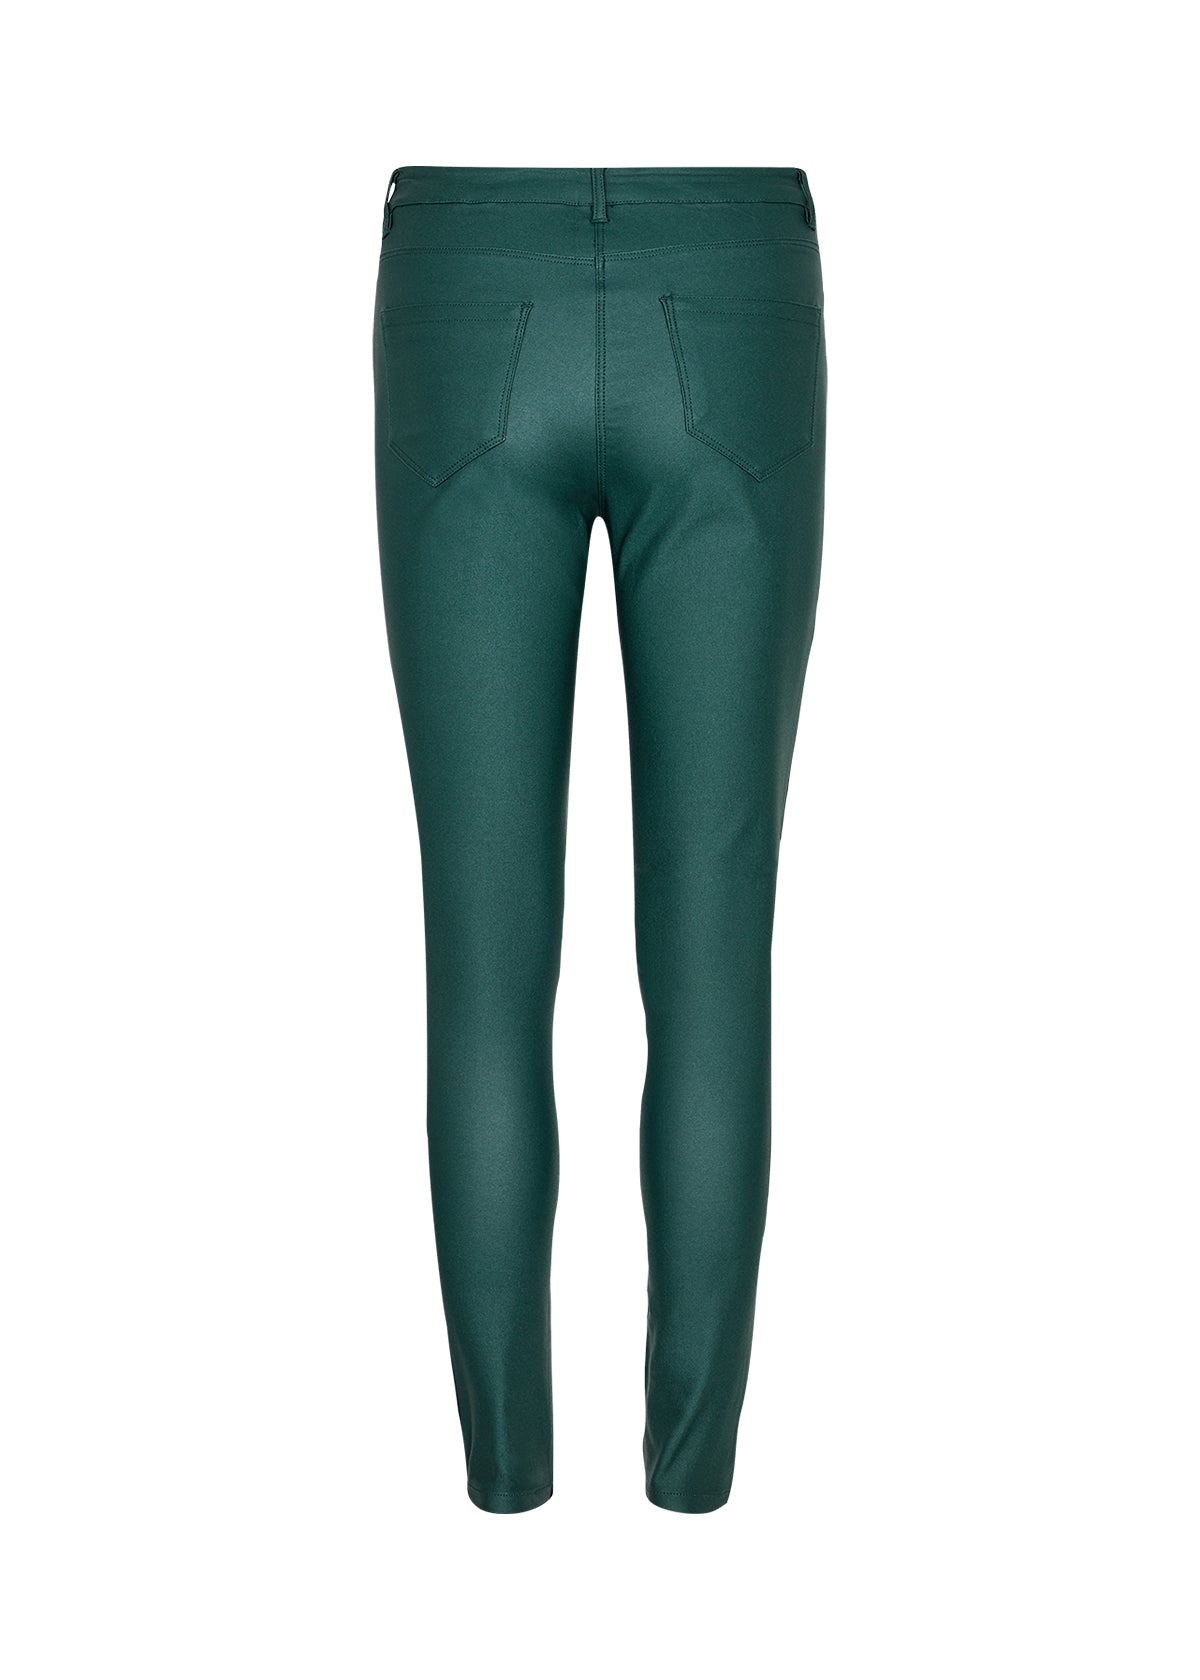 Soya Concept Pam Green Trousers